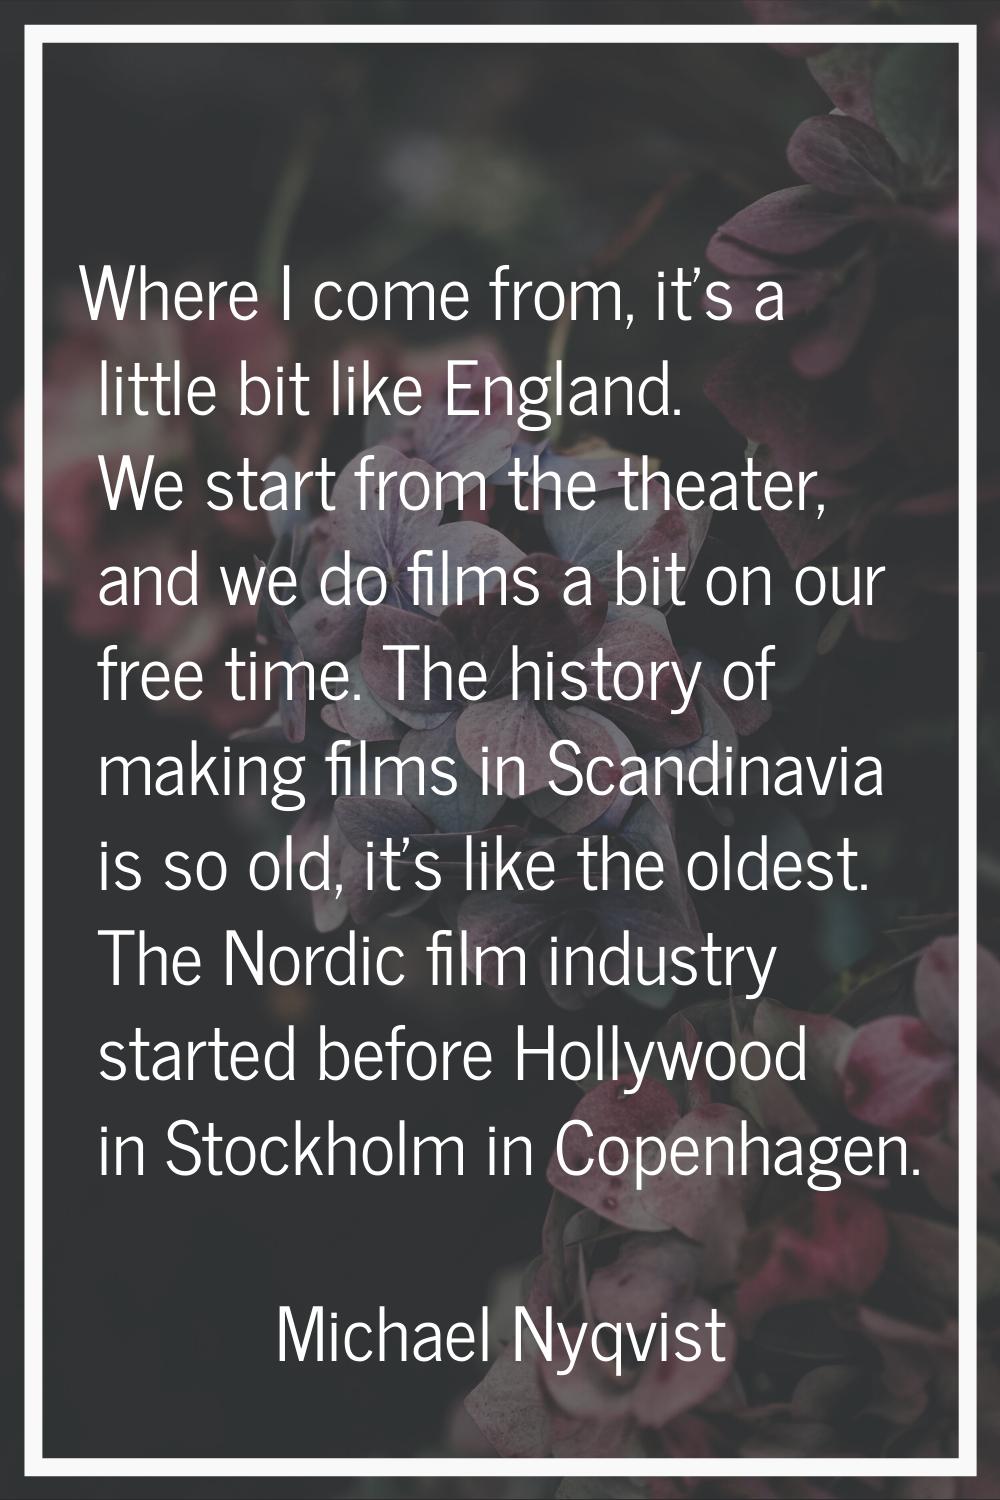 Where I come from, it's a little bit like England. We start from the theater, and we do films a bit